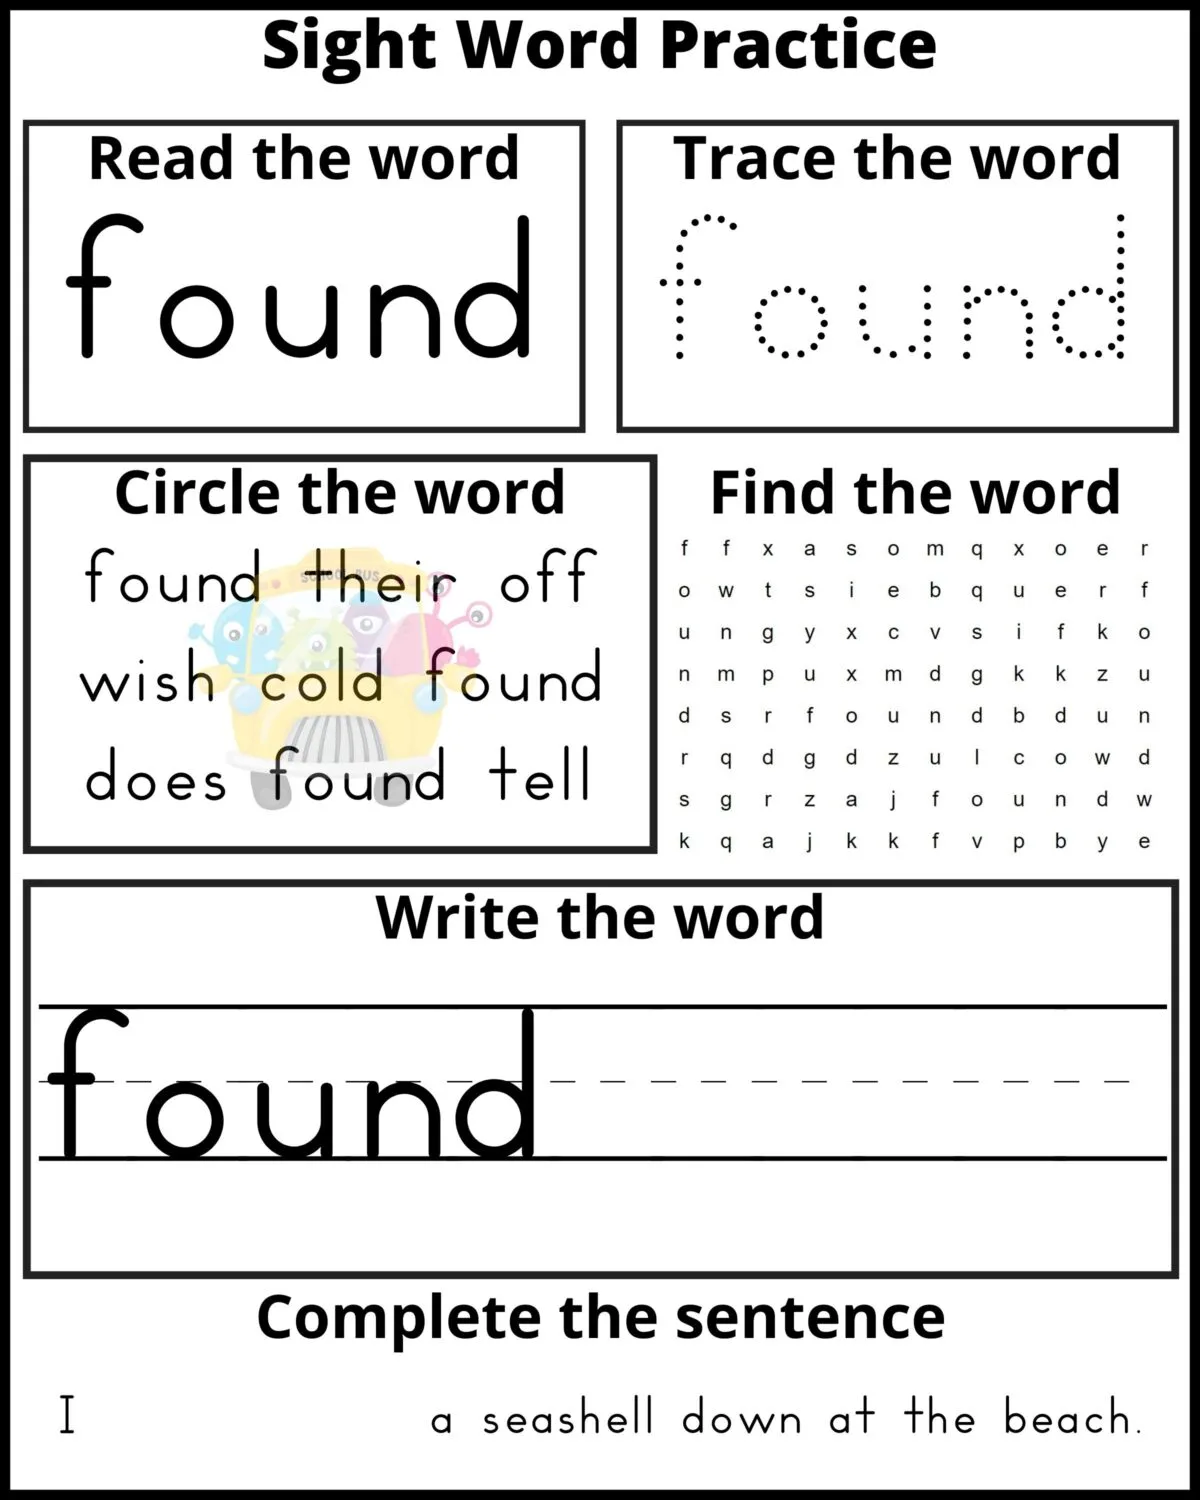 Free printable Second Grade Sight Word Practice Sheets from the Dolch Sight Word List. Includes 46 Sheets for your child to learn from!  